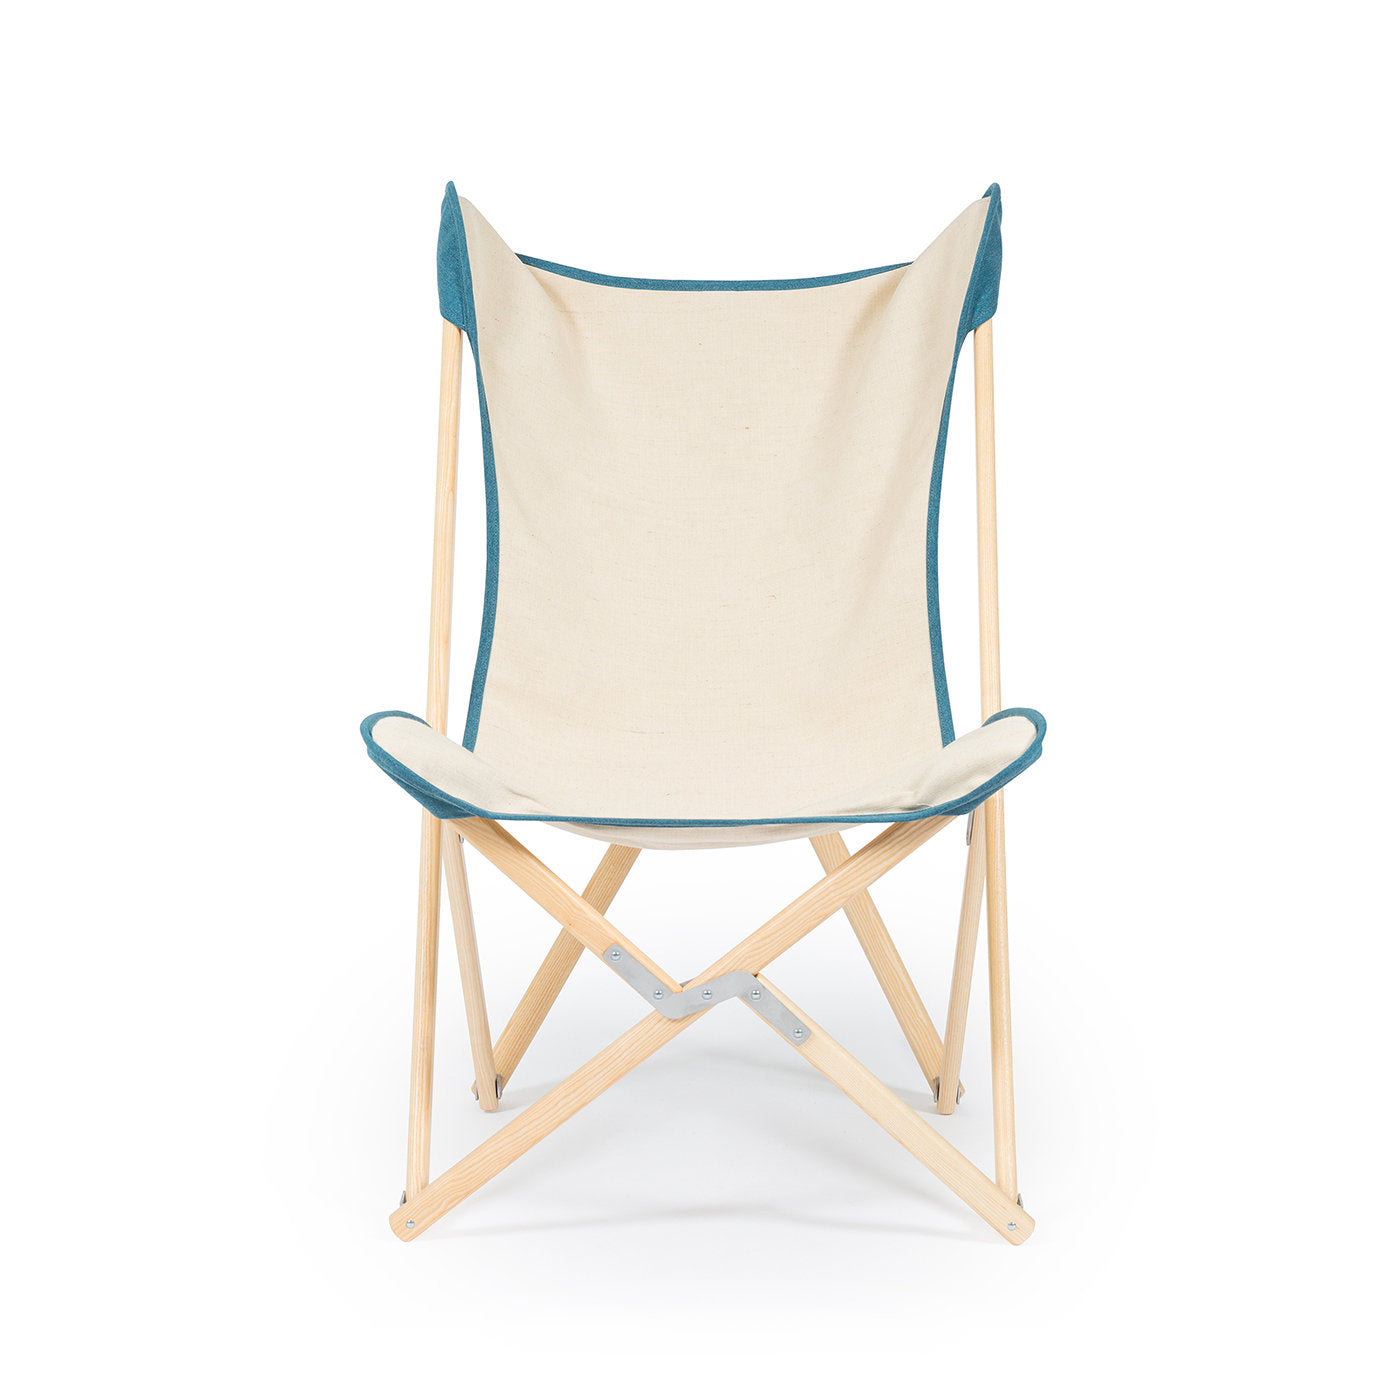 Tripolina Armchair in Cream and Teal Blue - Alternative view 1